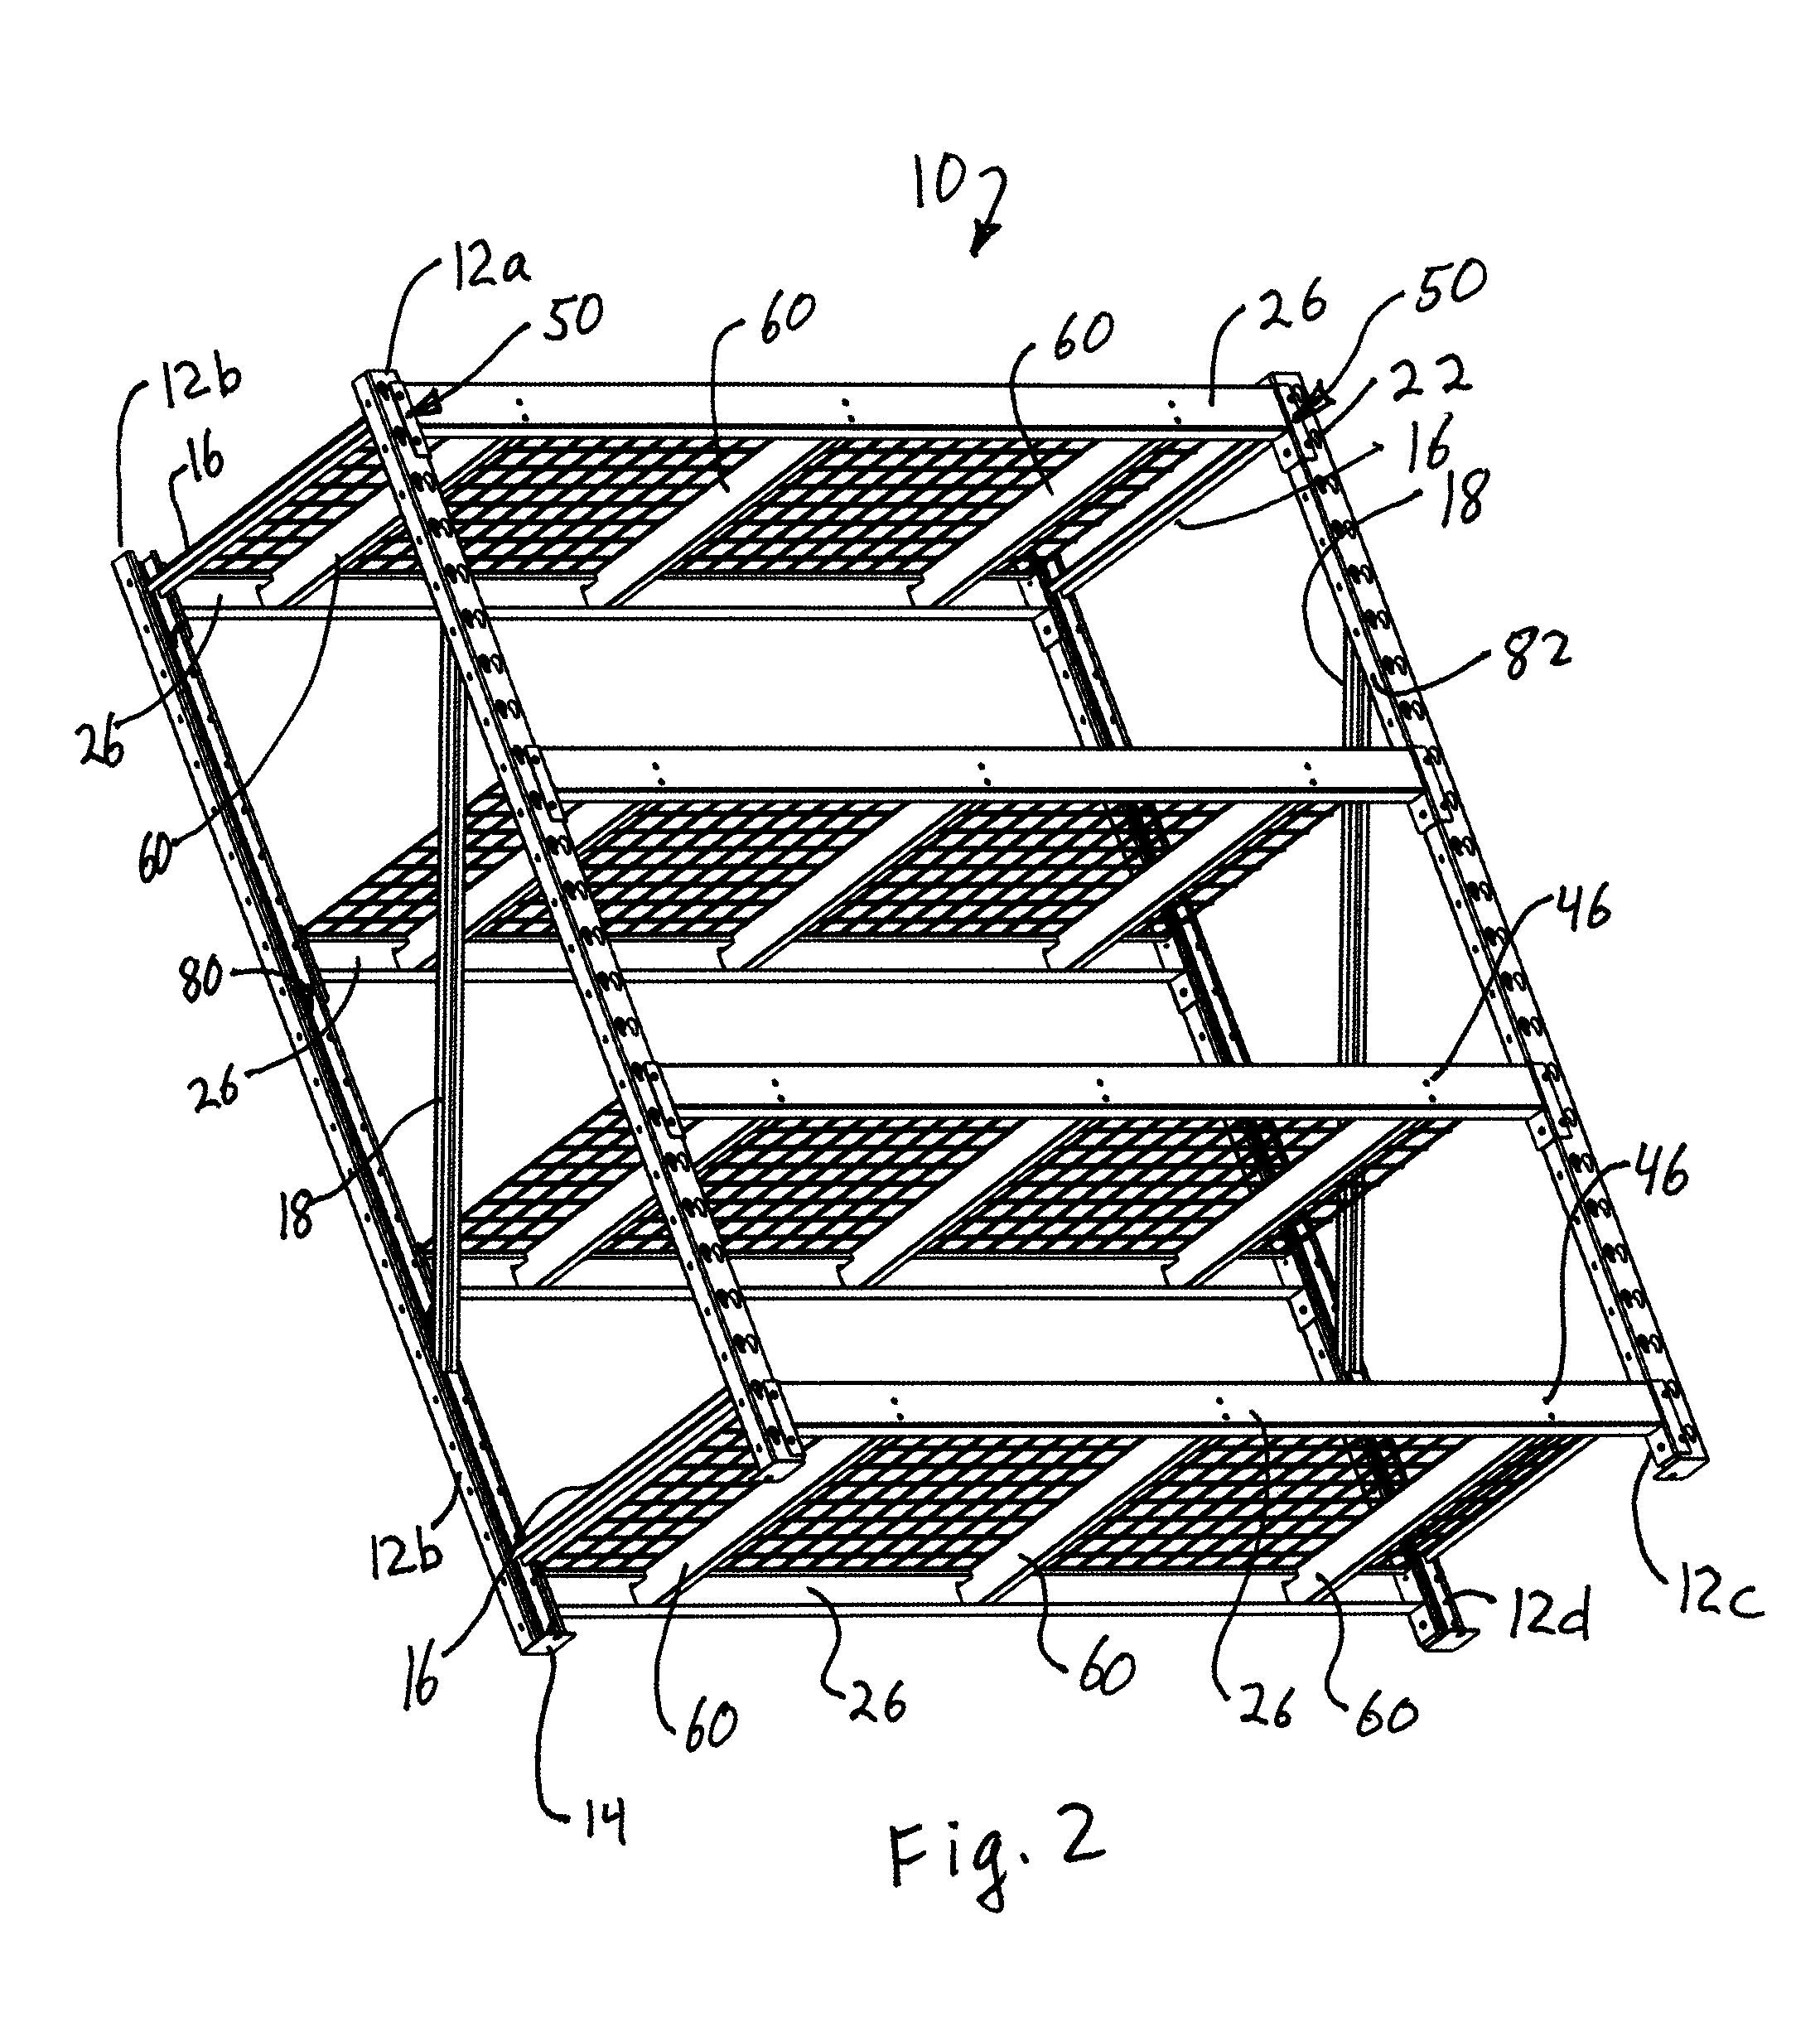 Storage rack and cross-bar support